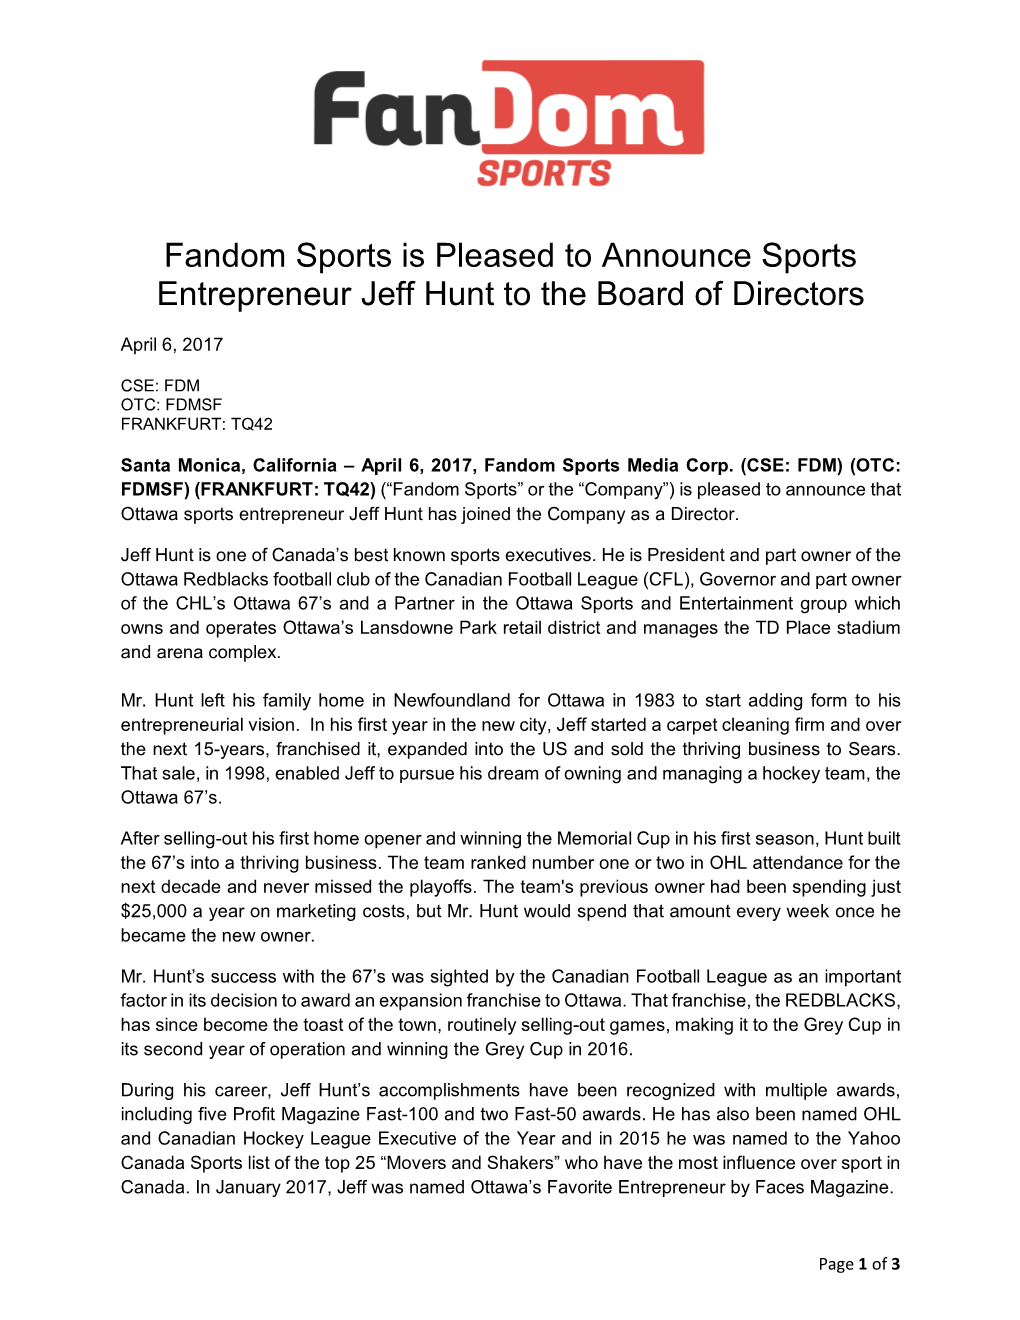 Fandom Sports Is Pleased to Announce Sports Entrepreneur Jeff Hunt to the Board of Directors